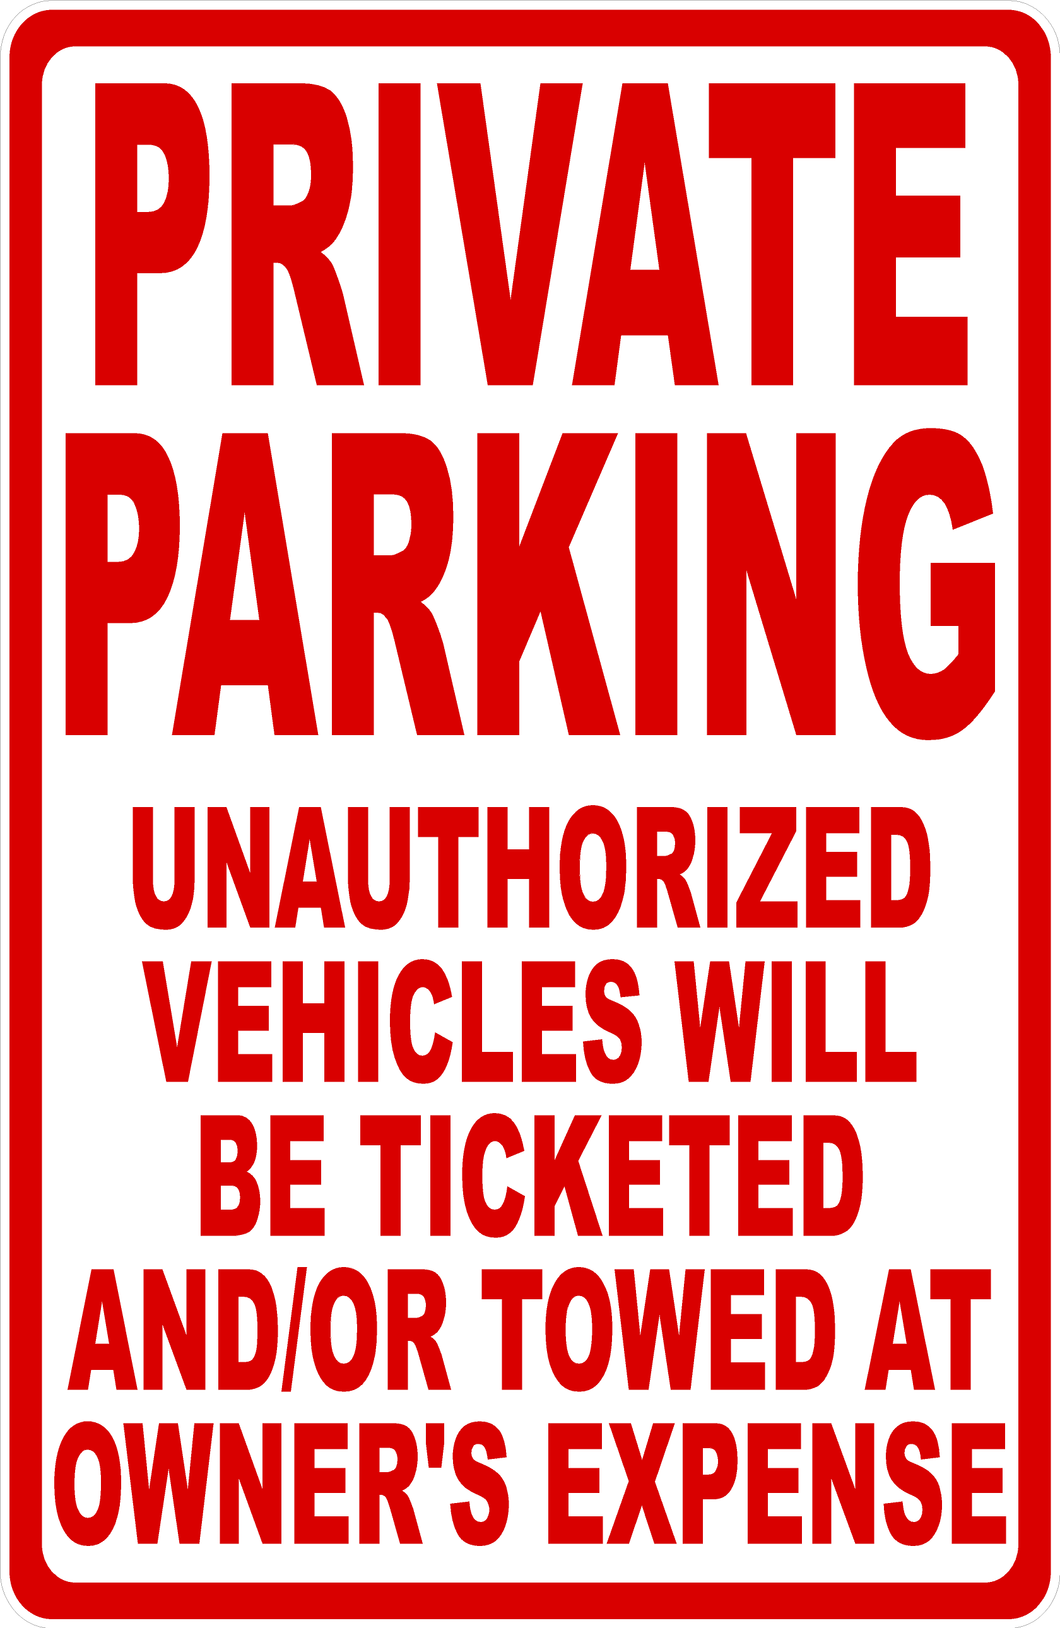 Private Parking Unauthorized Vehicles Ticketed/ Towed Owners Expense Sign